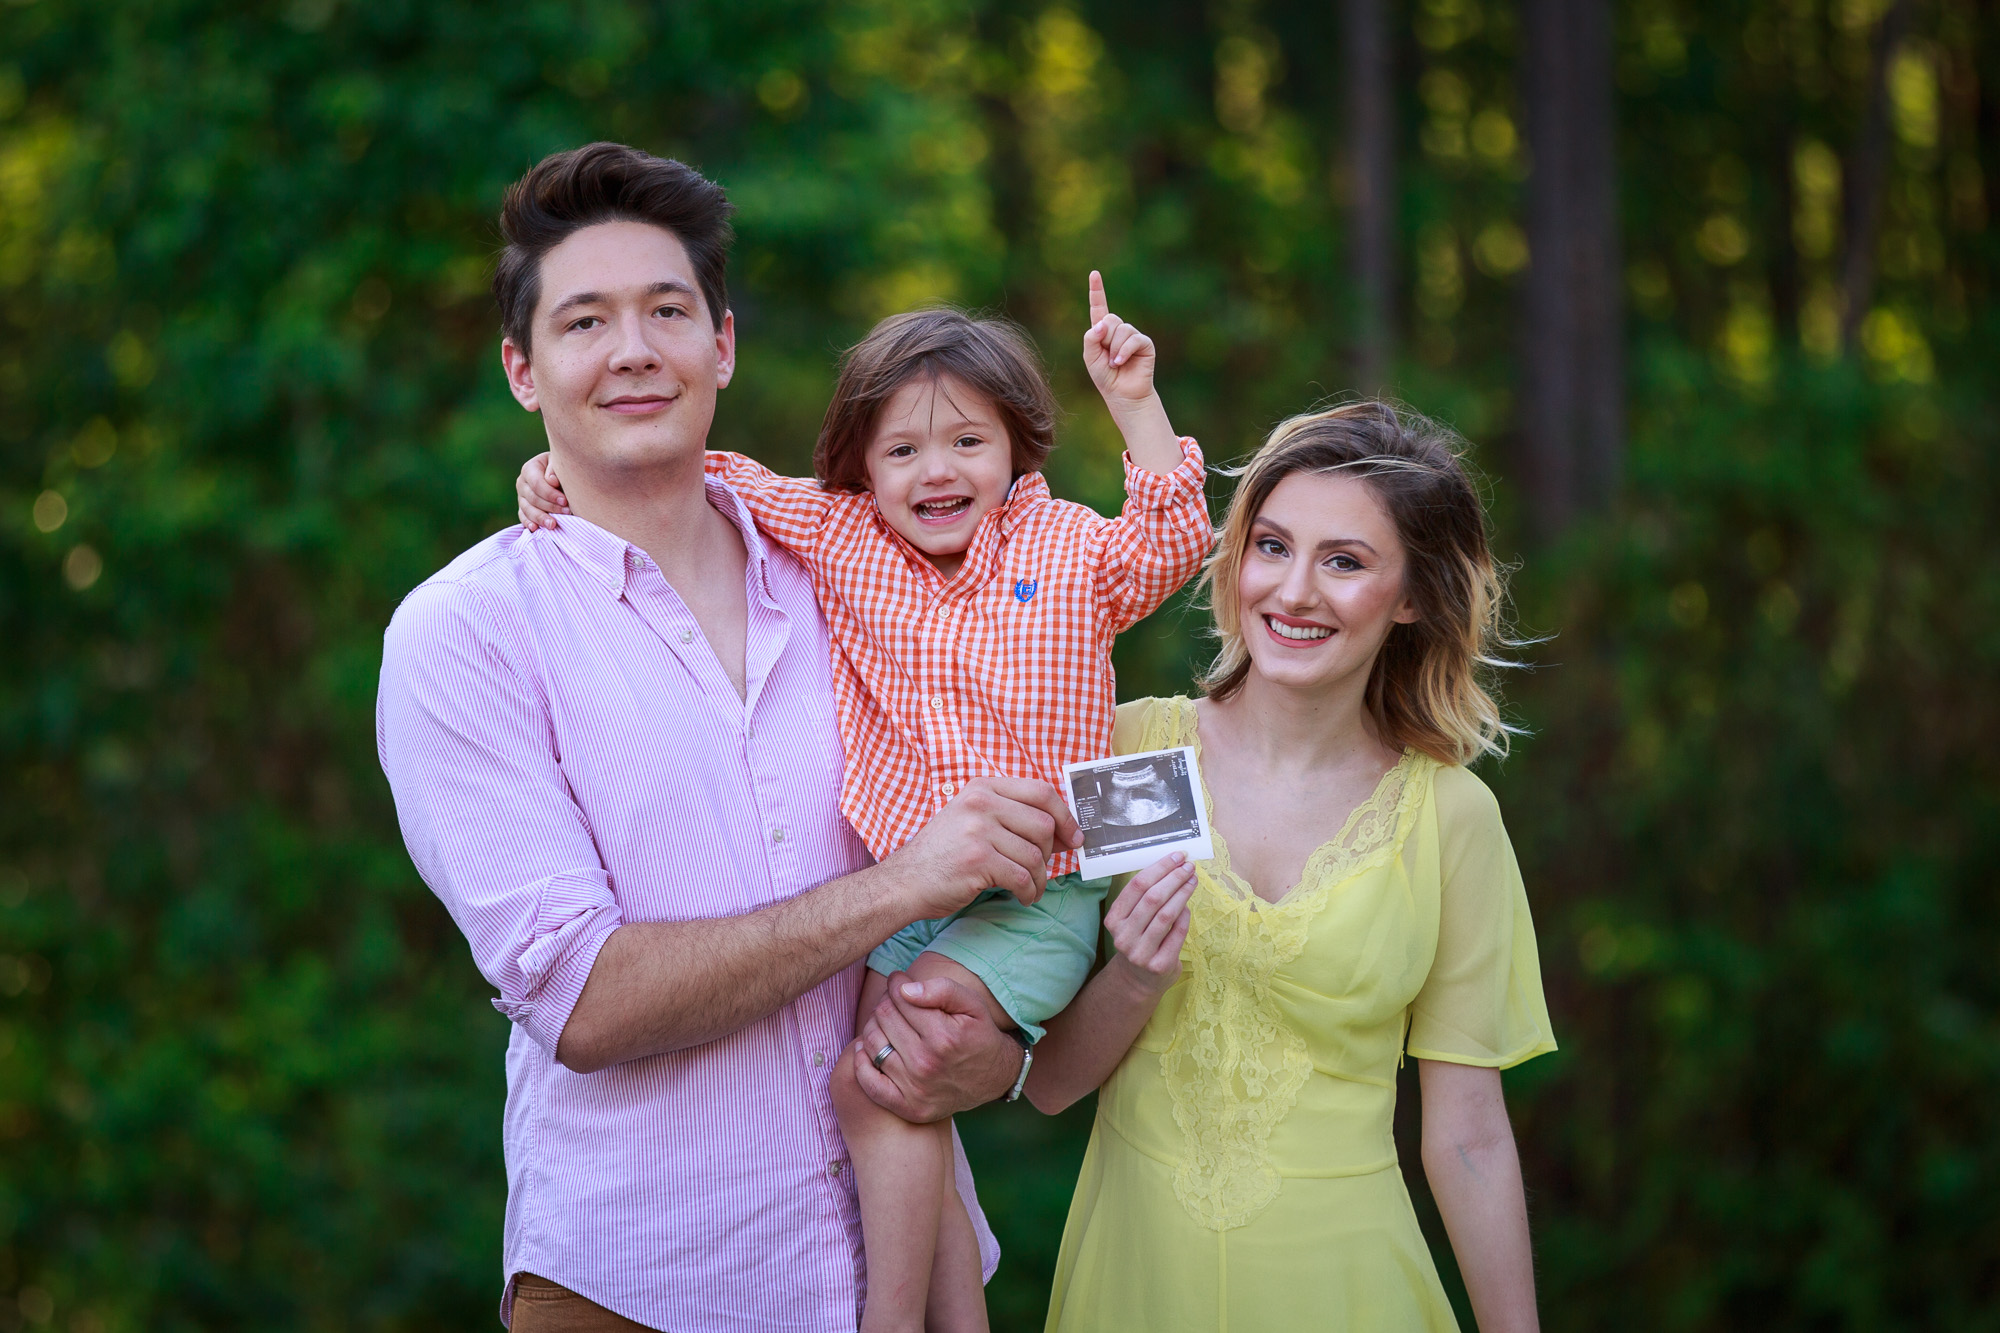 Fashion blogger, Jessica Linn of Linn Style, family photo pregnancy announcement with son and husband Joel Pagan , Jessica Linn is wearing a popular spring trend of pastel yellow and lace dress from ASOS.